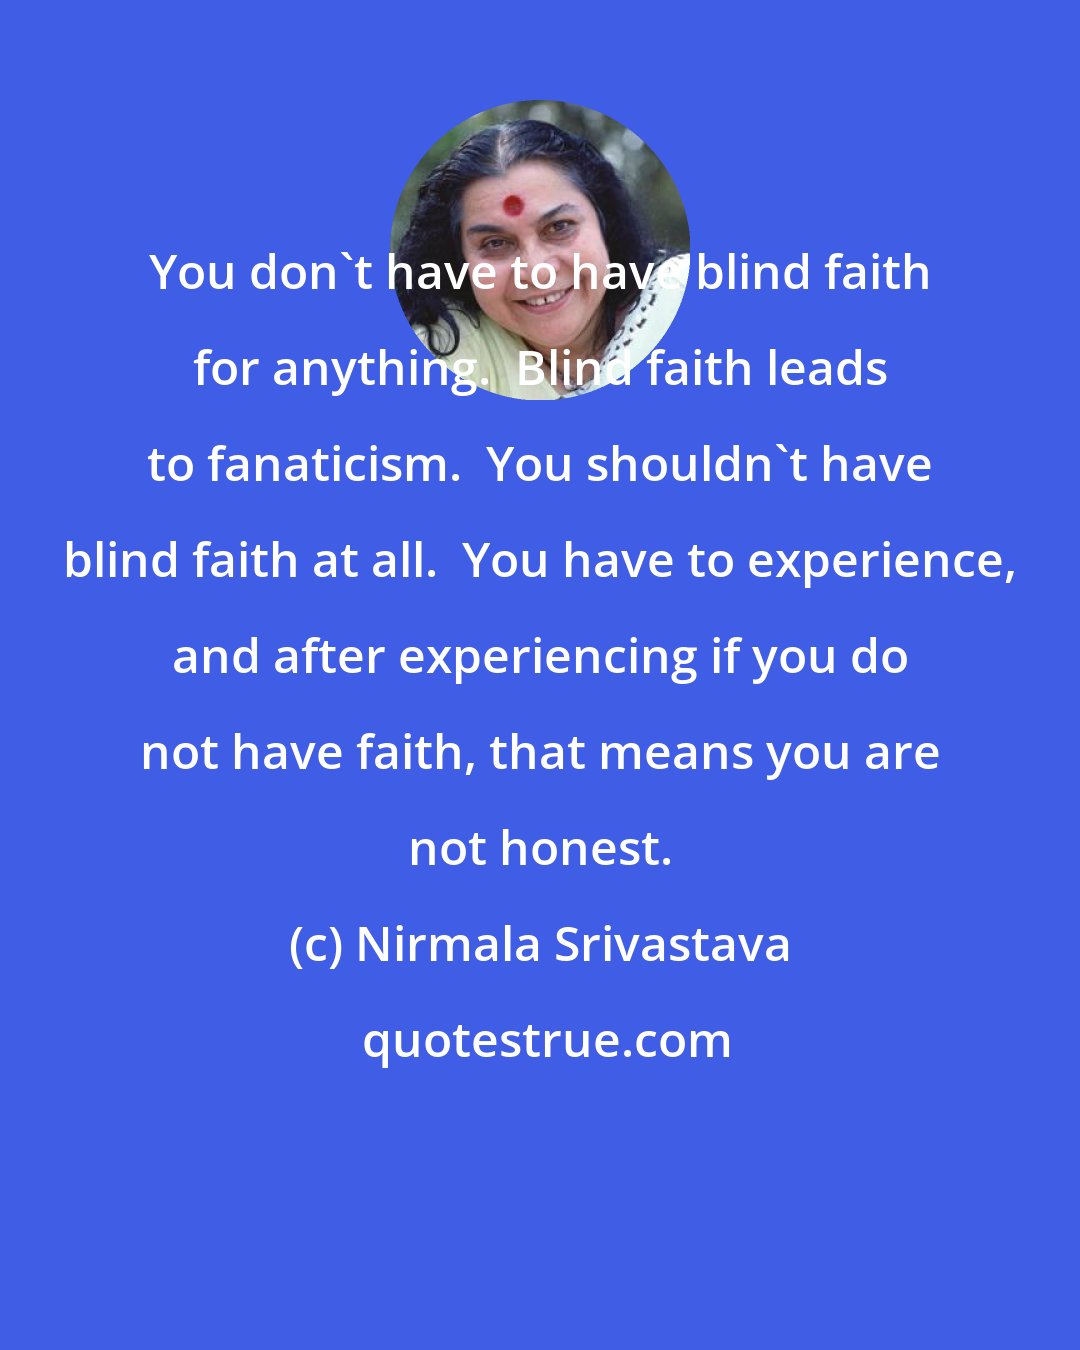 Nirmala Srivastava: You don't have to have blind faith for anything.  Blind faith leads to fanaticism.  You shouldn't have blind faith at all.  You have to experience, and after experiencing if you do not have faith, that means you are not honest.